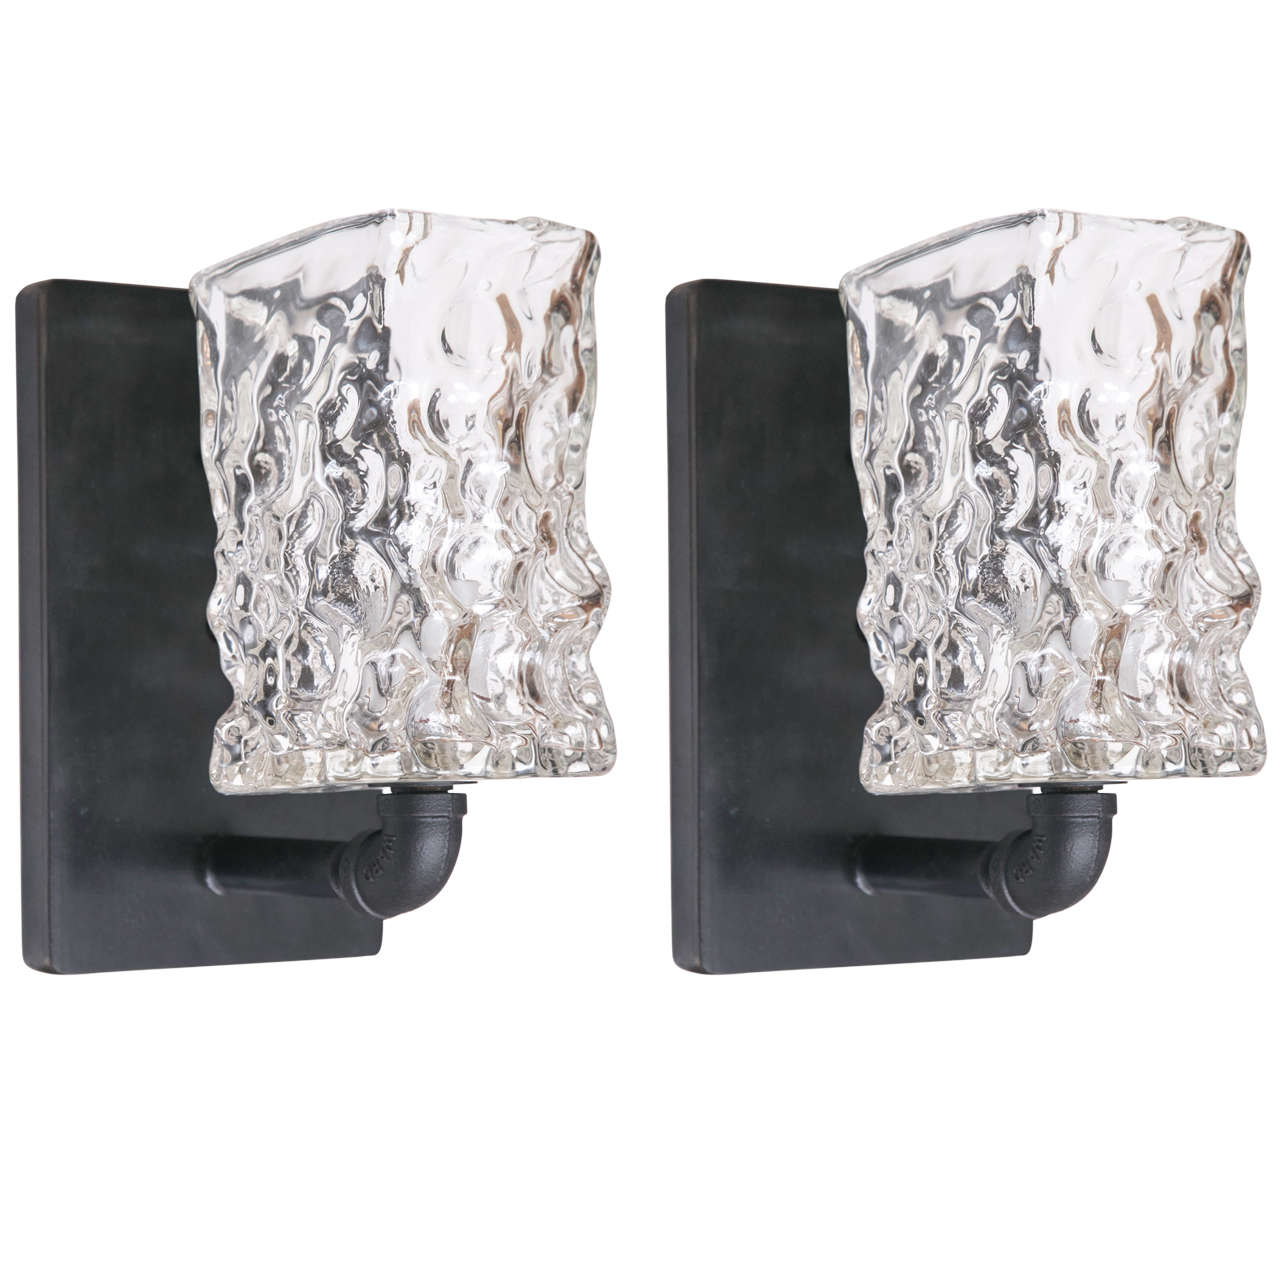 Pair of Industrial Style Handblown Glass Wall Sconces